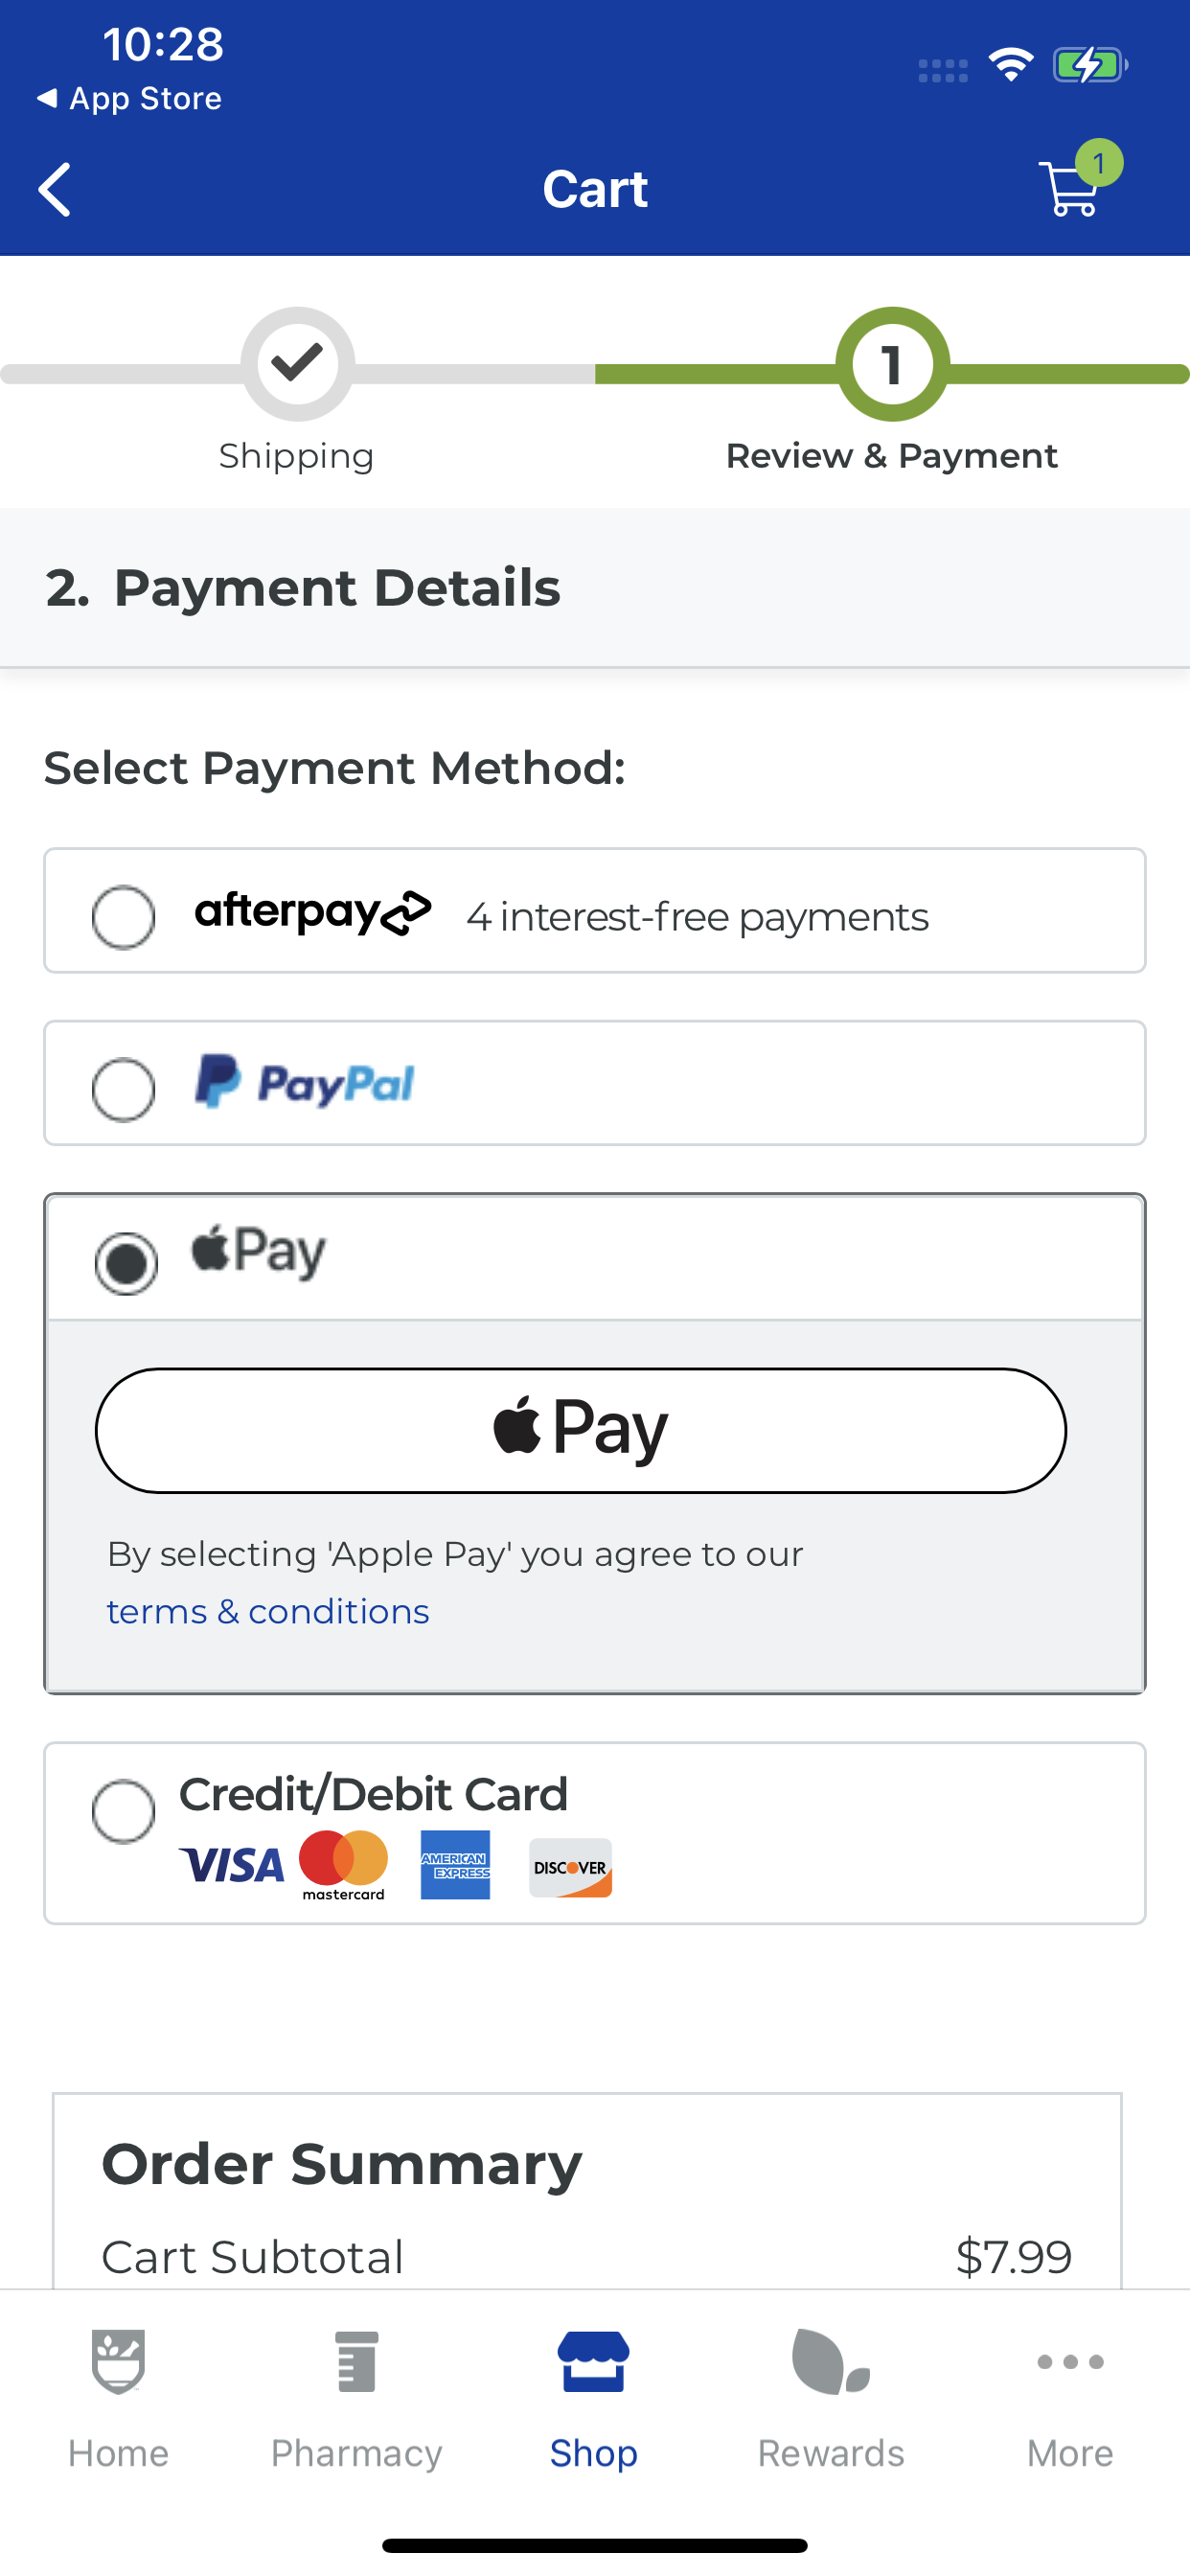 Rite Aid accepts Apple Pay on its app.